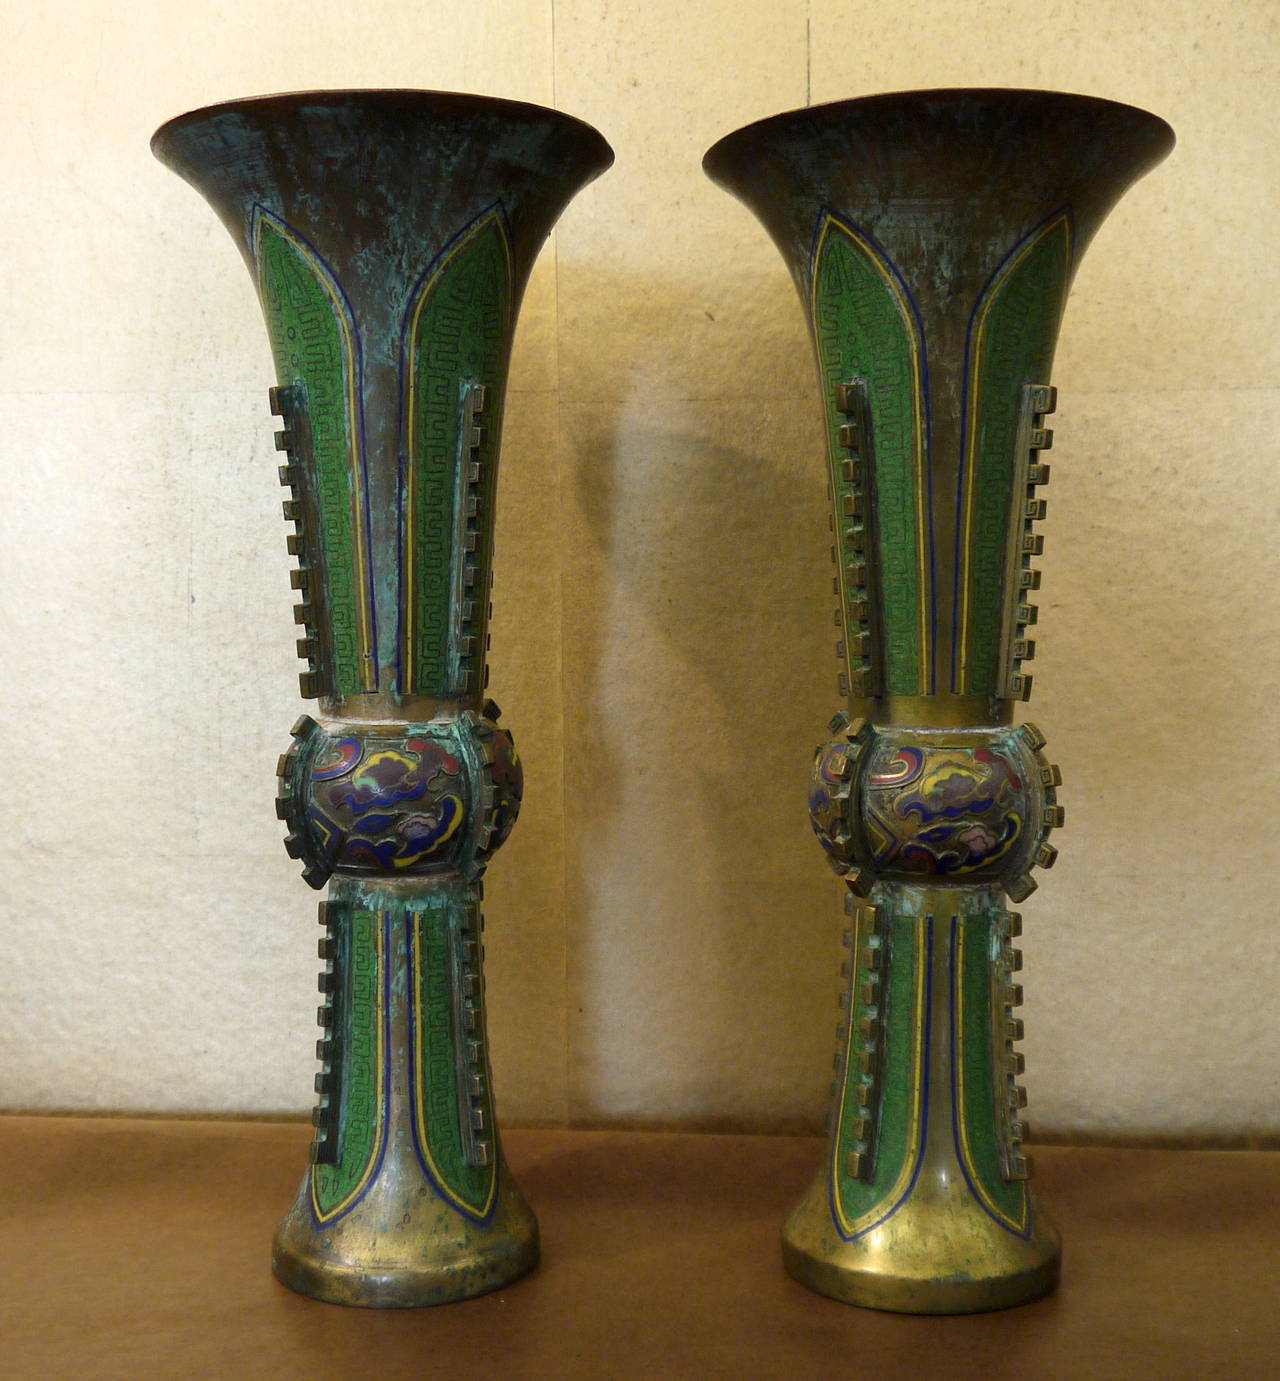 A pair of vintage Chinese cloisonné Ku shaped vases, with multicolored design of stylized clouds at center portion.